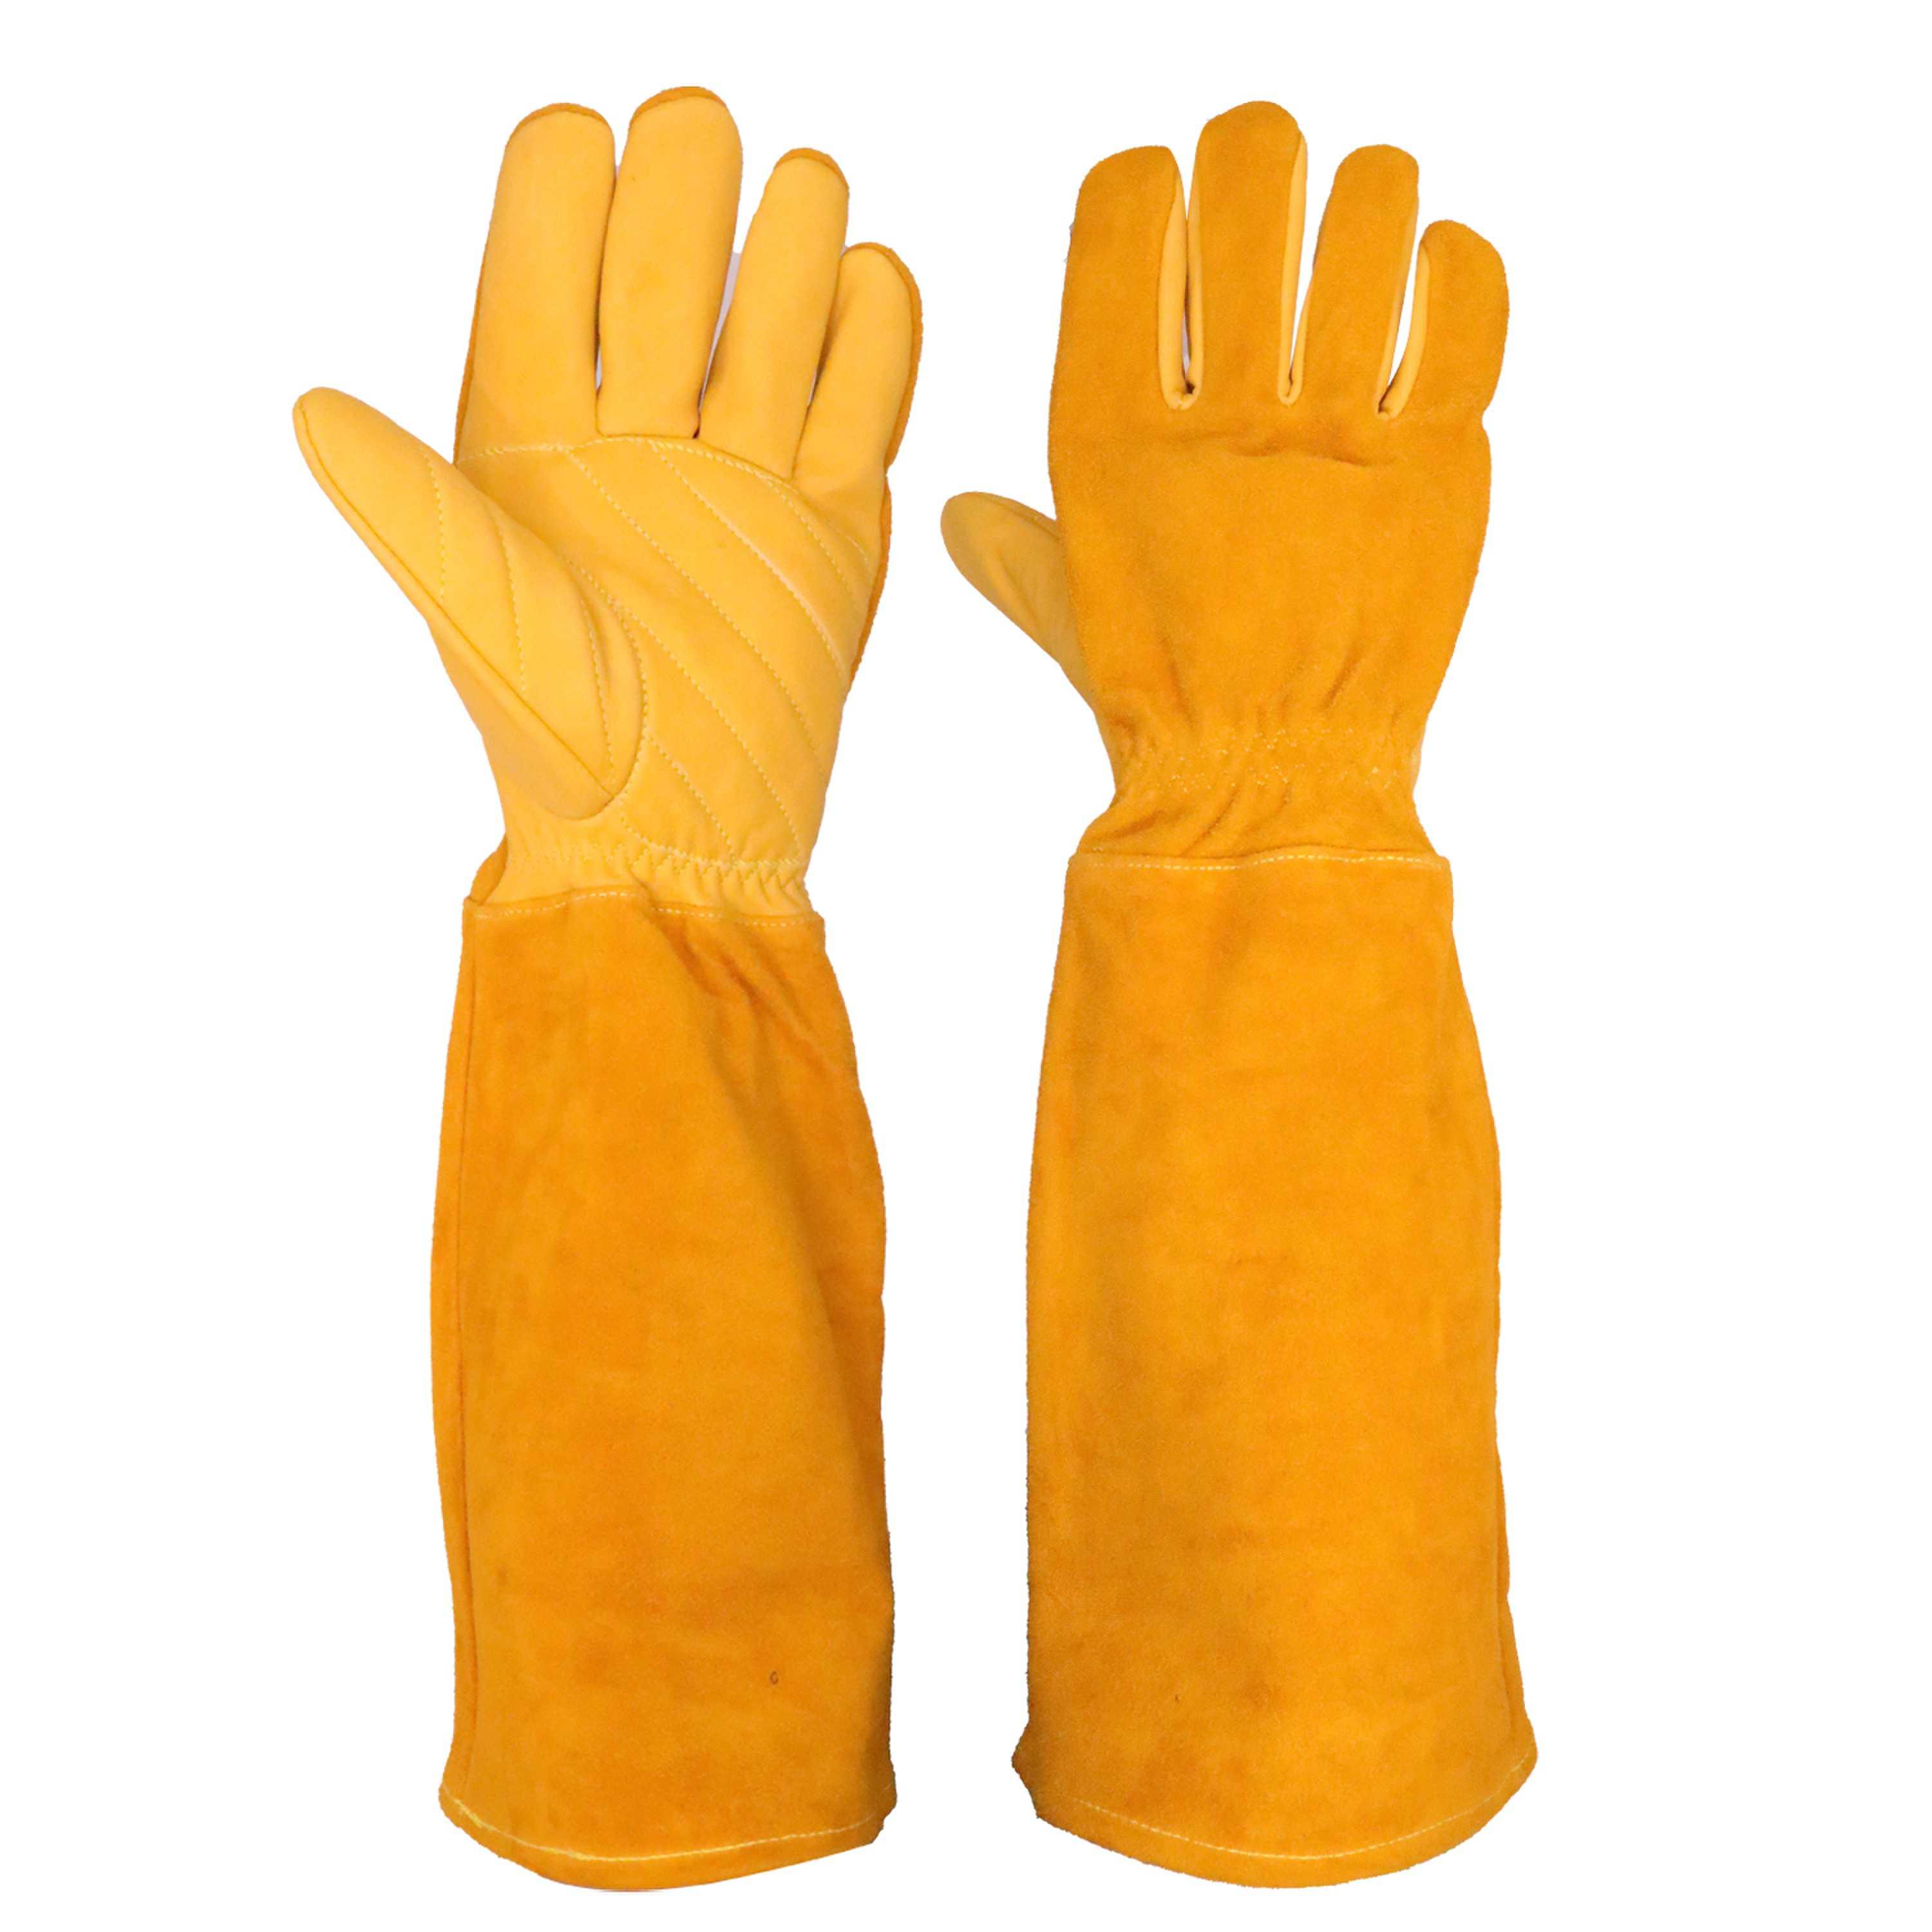 5144 PRISAFETY Leather Gardening Gloves with Forearm Protection,Professional Long Sleeve Trim Gardening Gloves